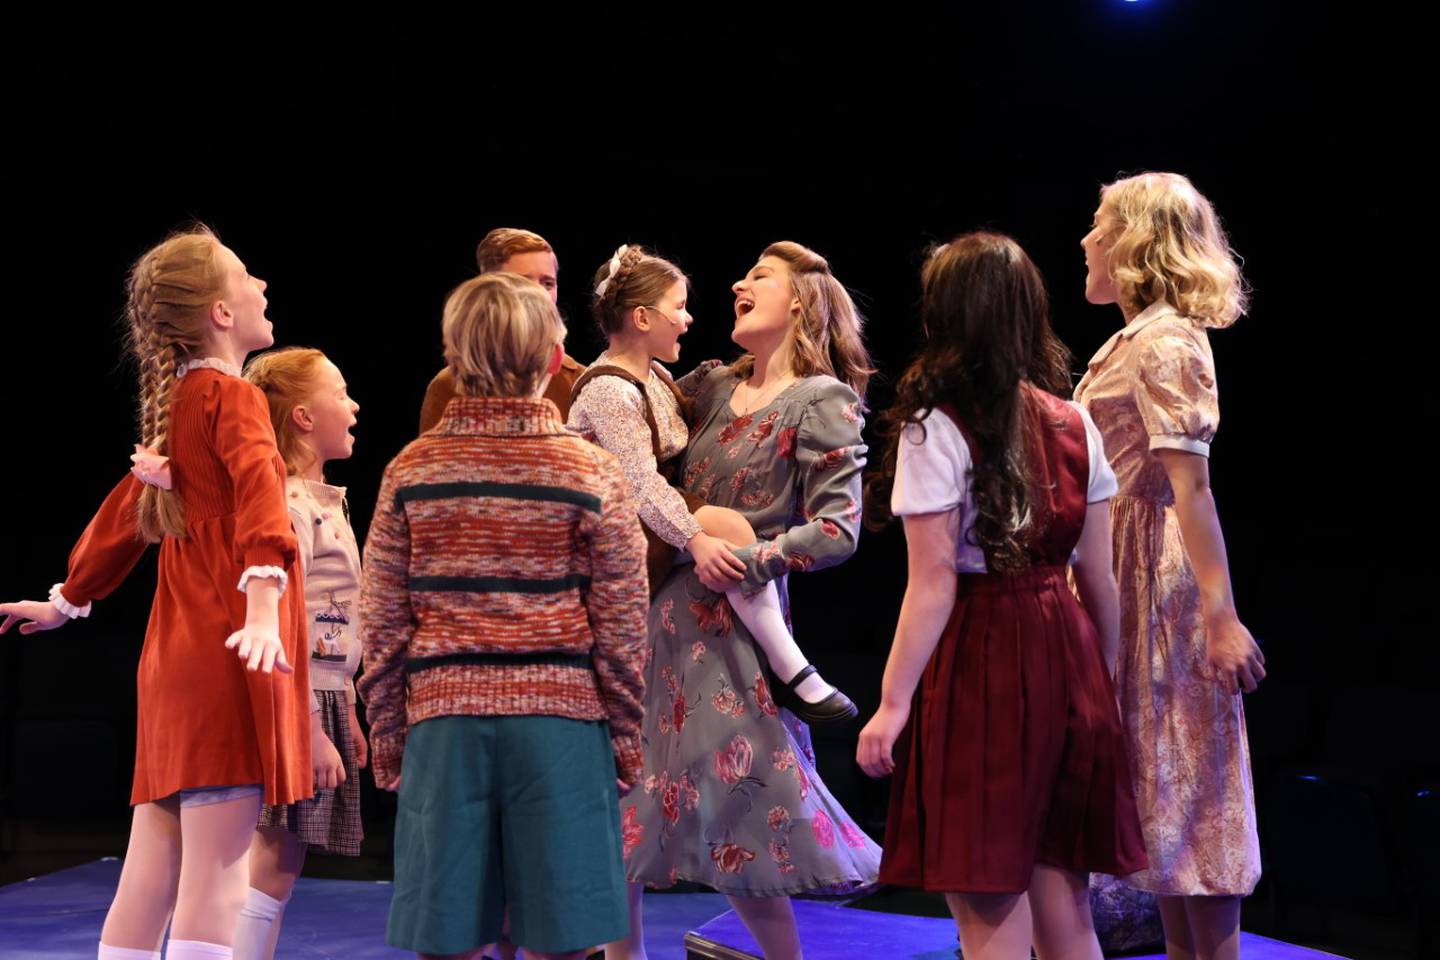 Maria (Cassidy Hamilton of New York, center) holds Gretl (Ava Doty of Downers Grove) in "The Sound of Music" production.